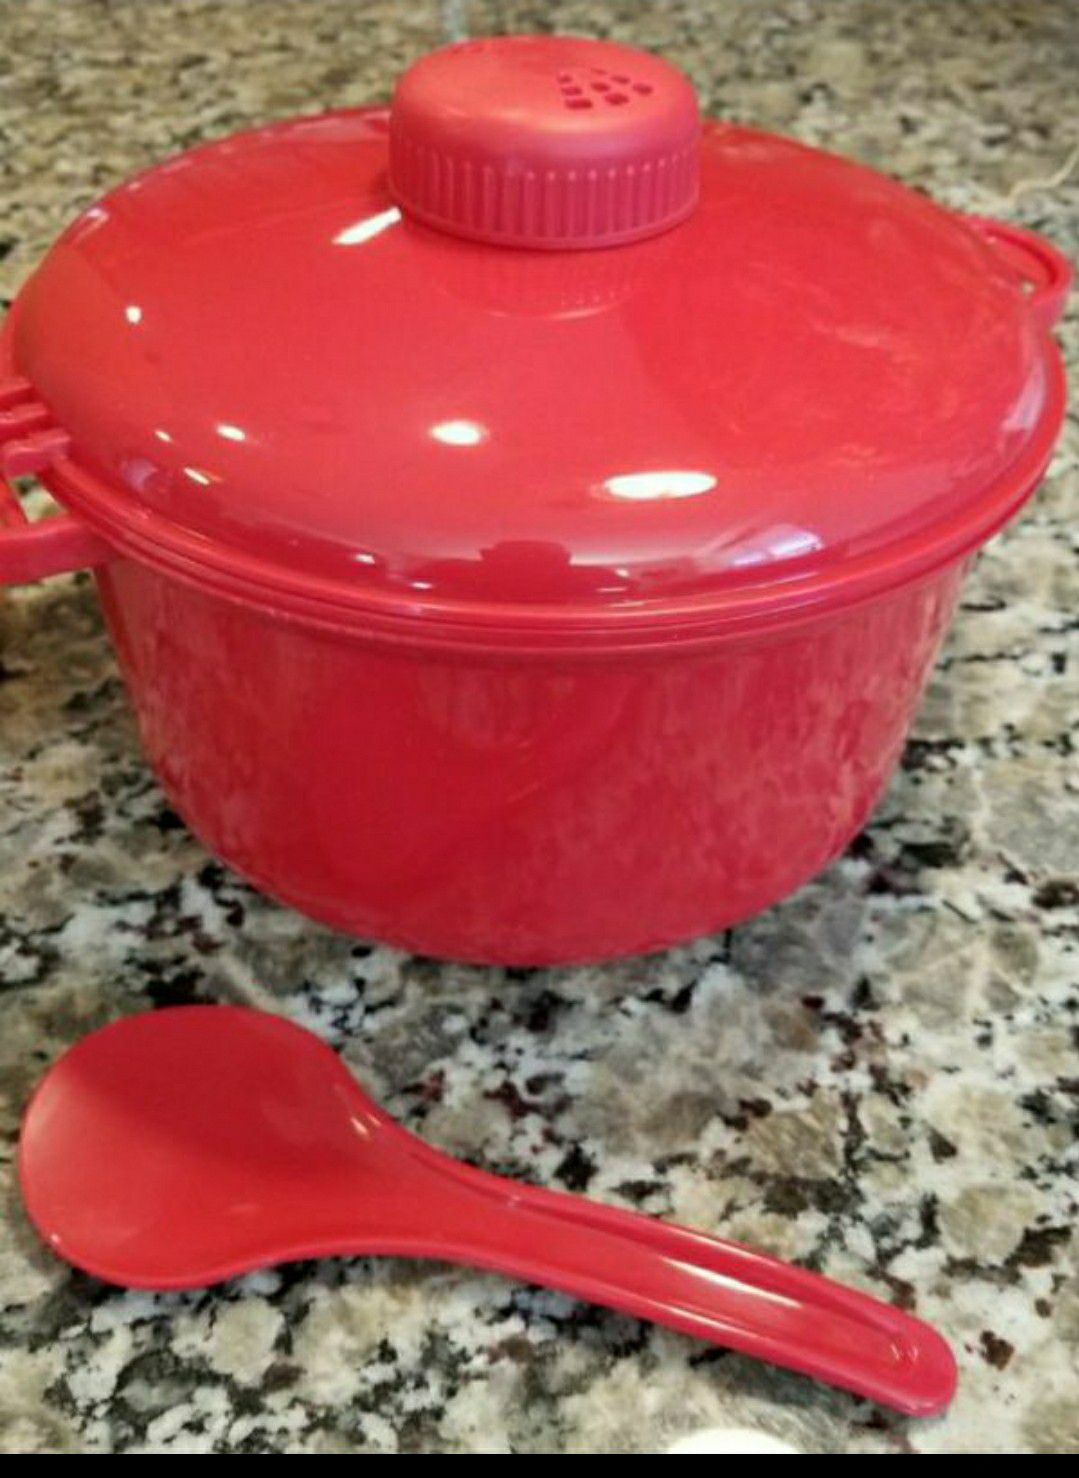 New Red Microwave Rice Cooker with Spoon, Cup and Directions